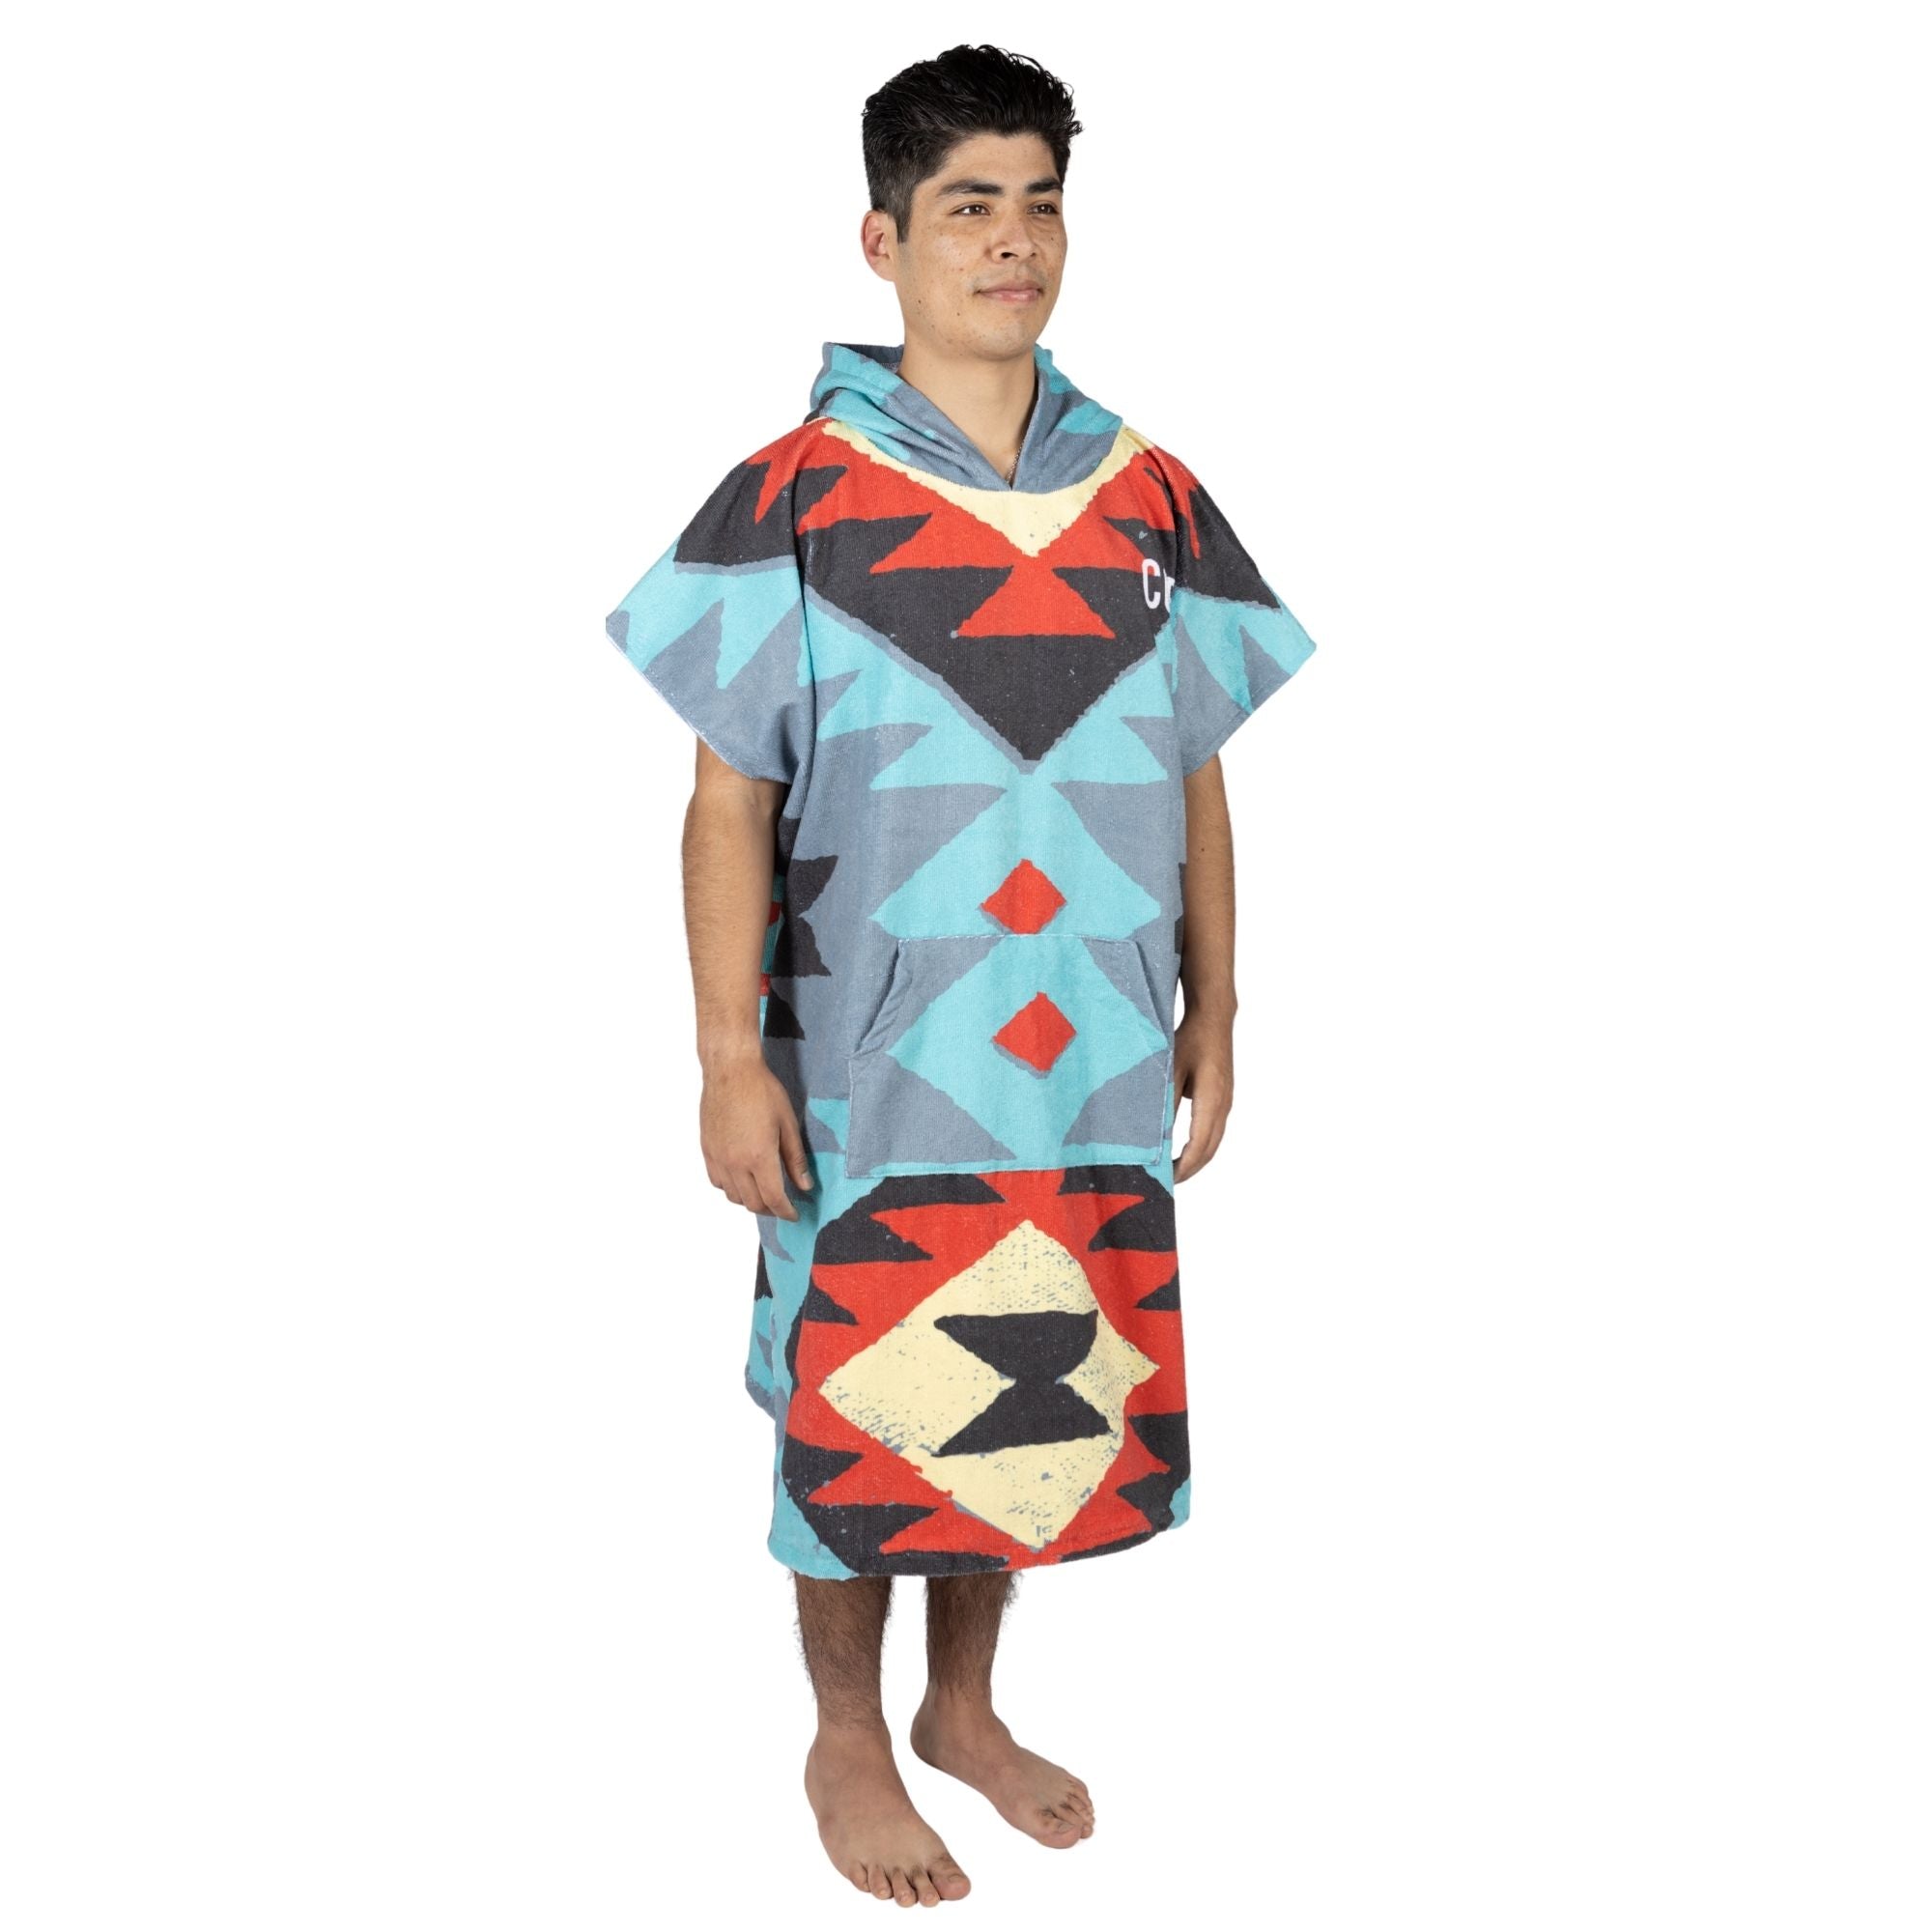 Changing Towel Poncho by COR Surf - Tribal-Tech (Large)